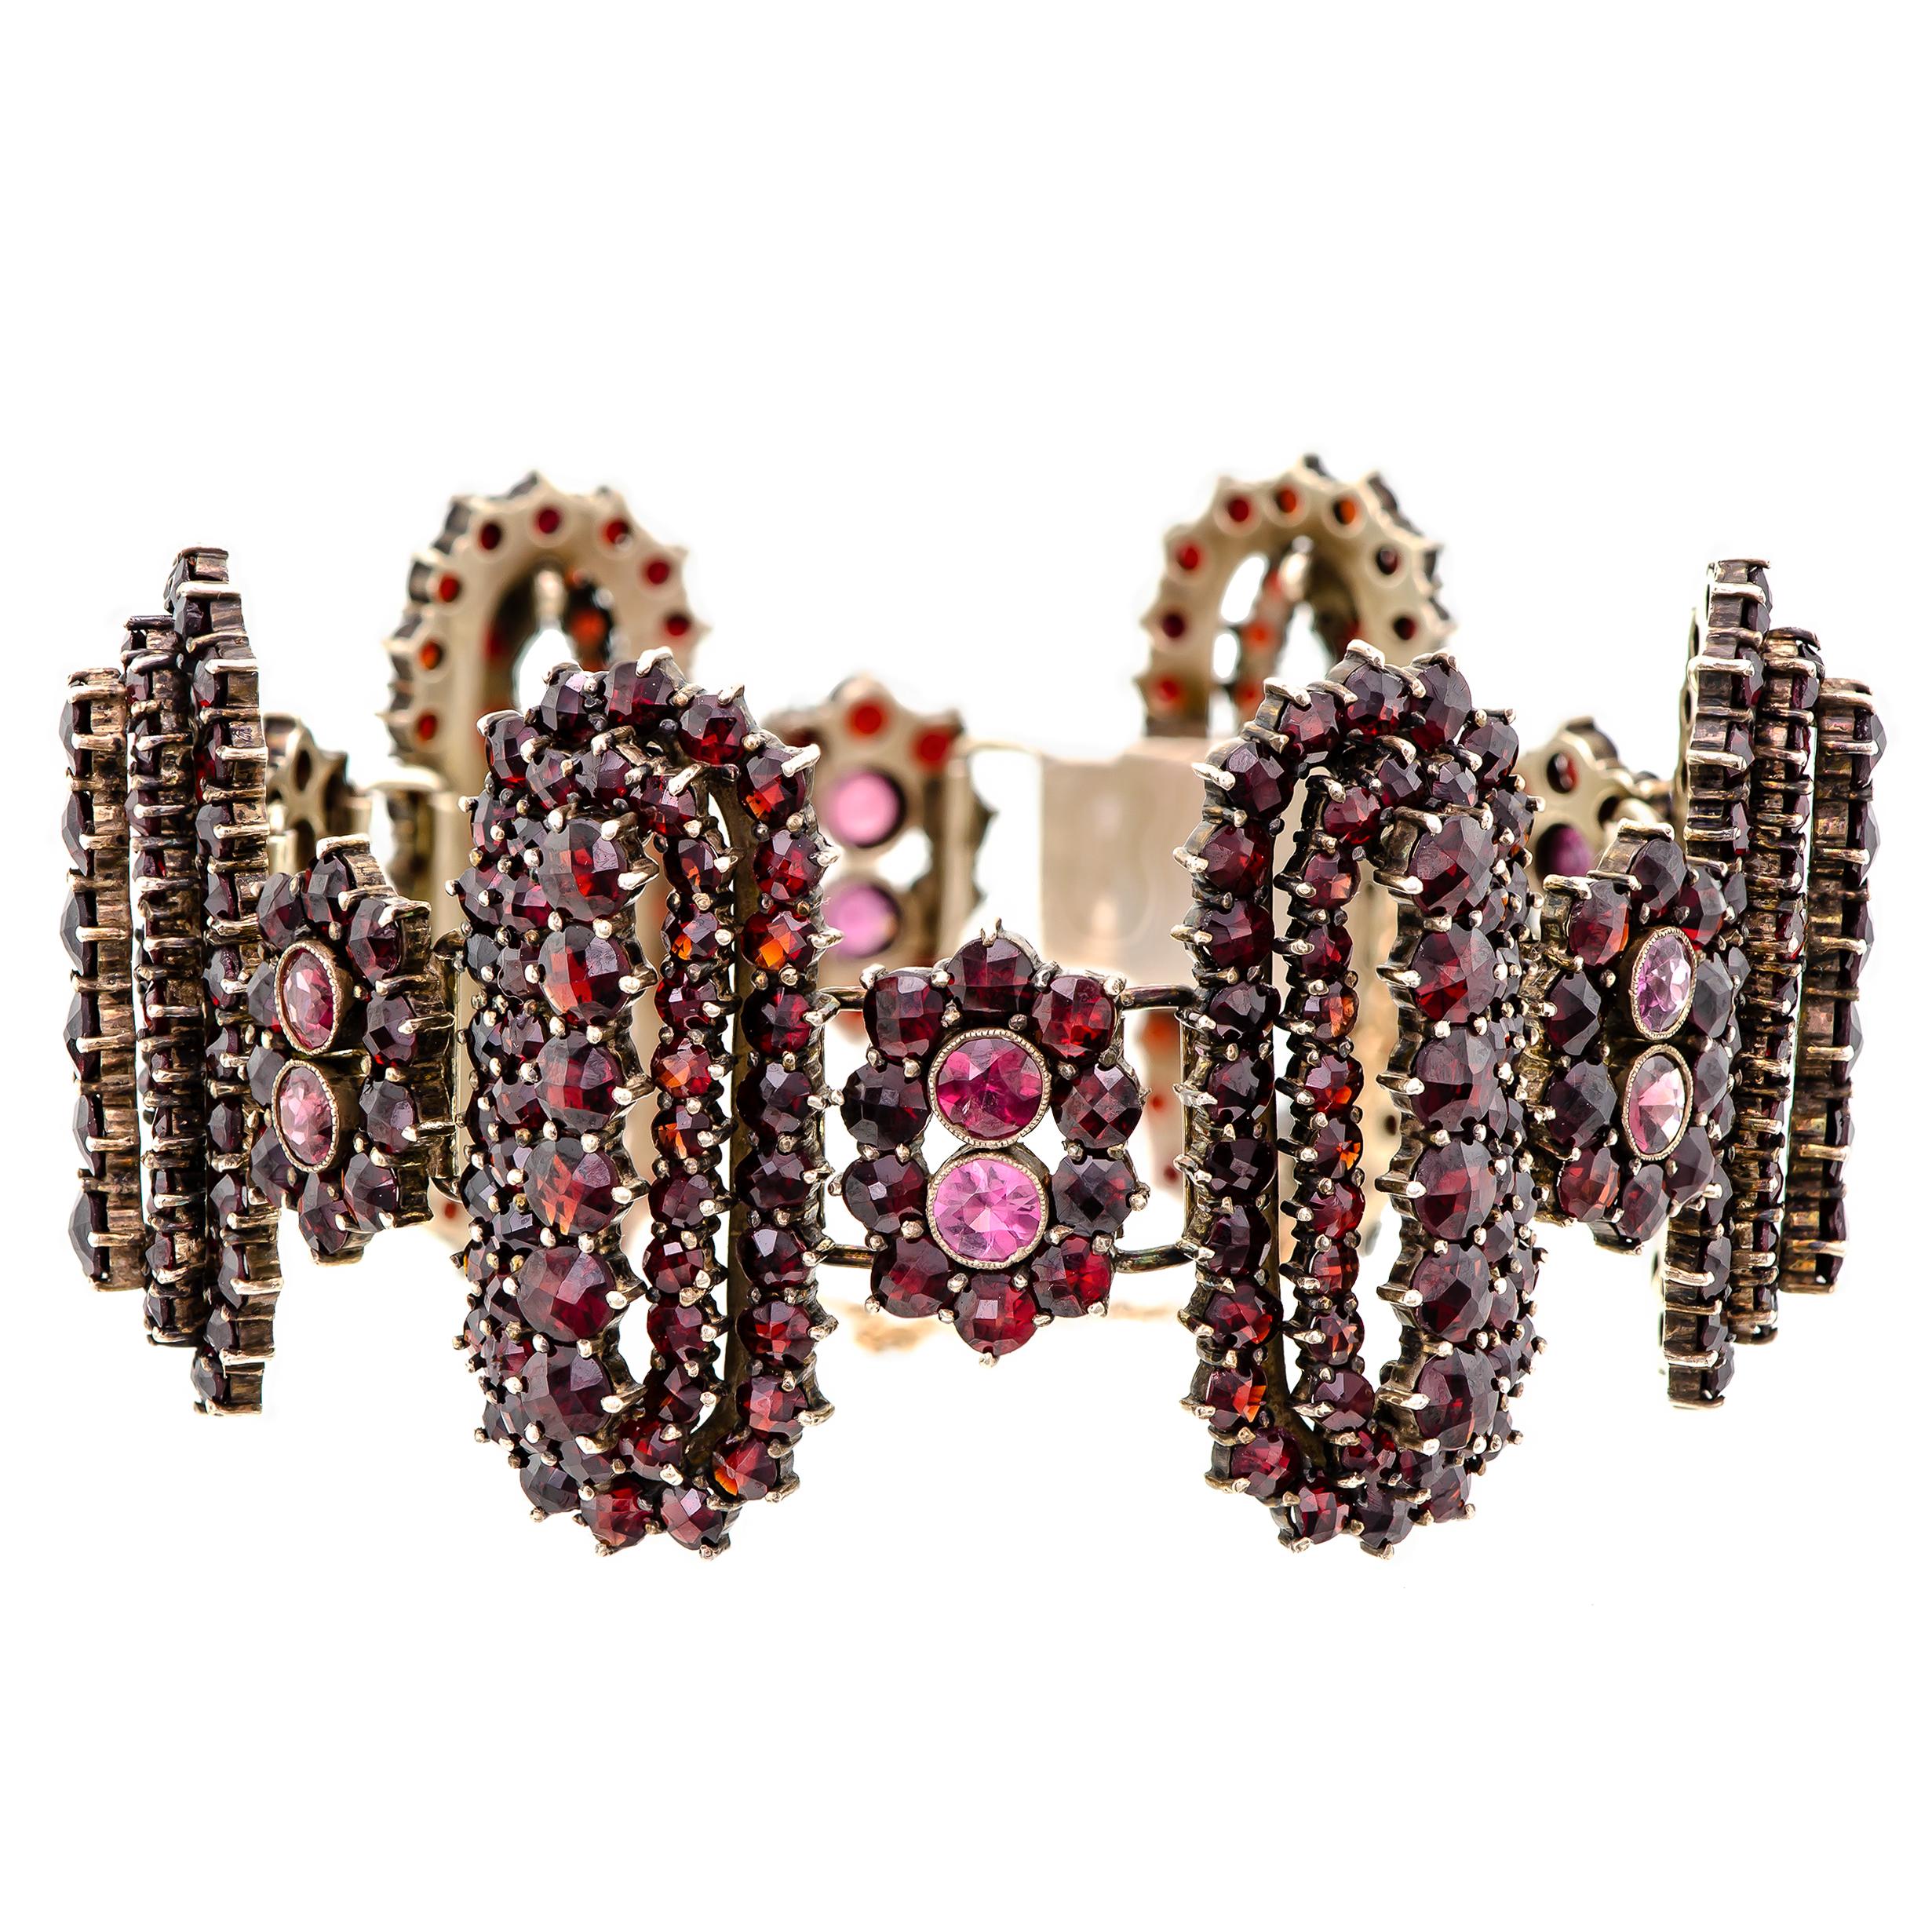 Magnificent vintage garnet and gilt-hinged wide flexible bracelet - set with numerous dazzling rose cut garnets into a repeated alternating hinged pattern of small and large lozenge-shaped sections. The garnets are deep in color and set in gilt or